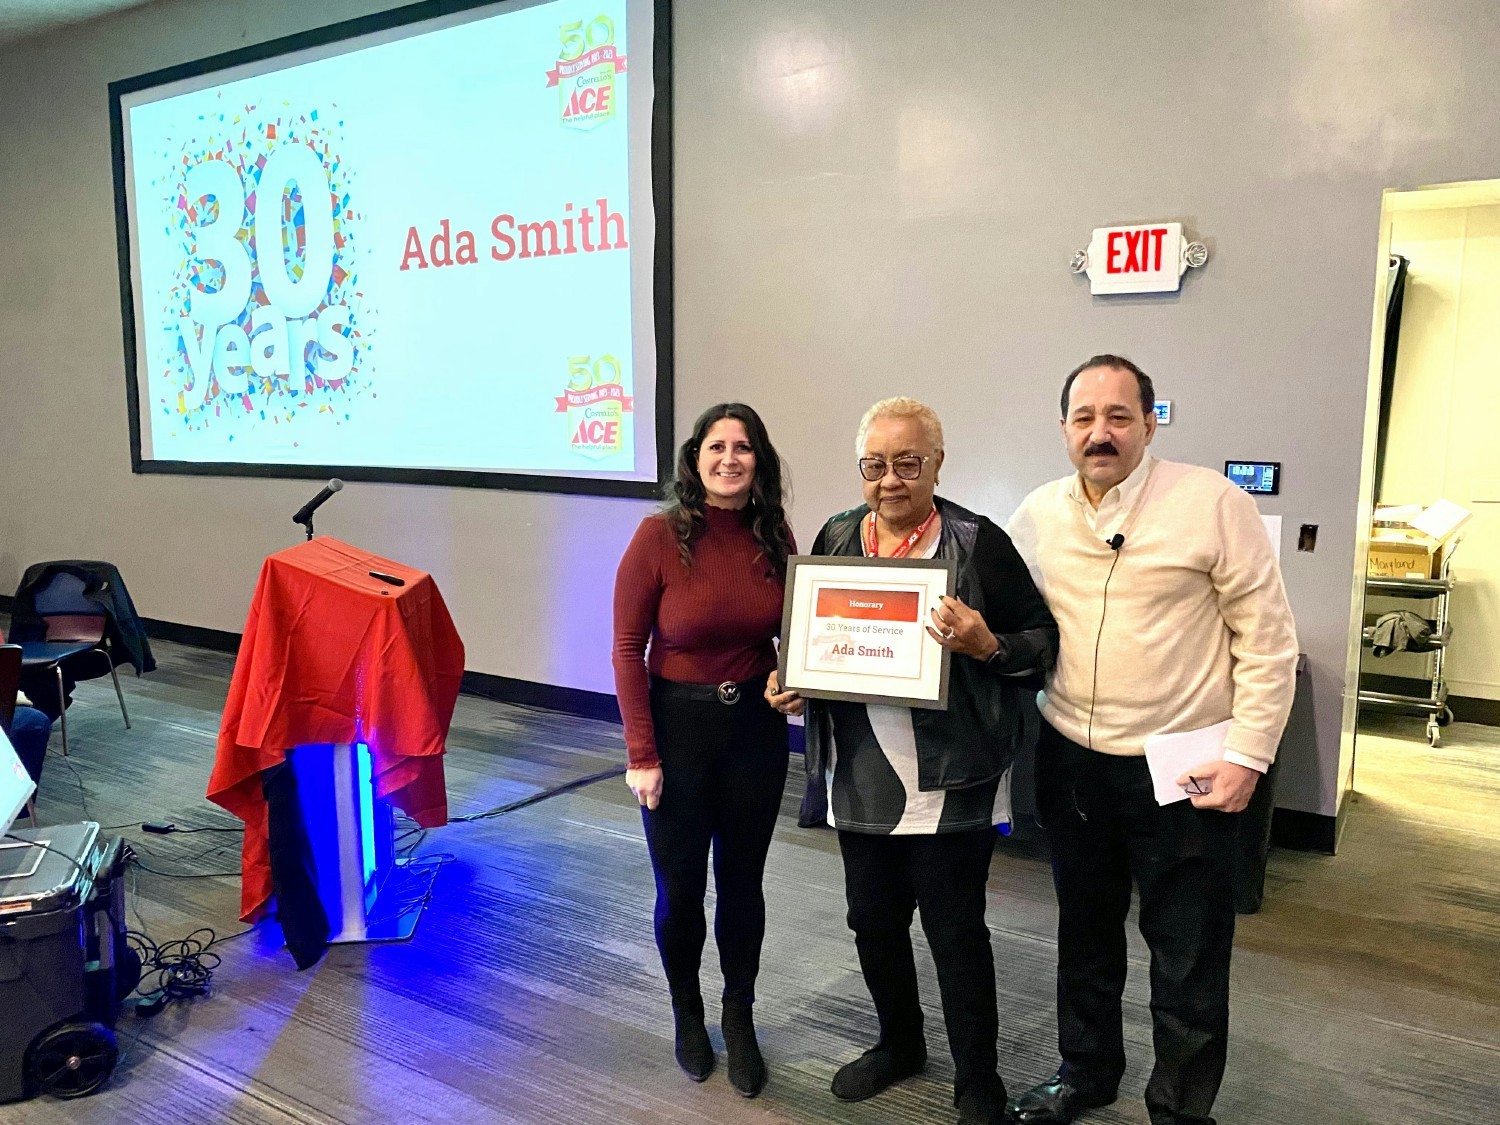 Ada S. from our Colonial Beach Store celebrated 30 years of service to Ace!